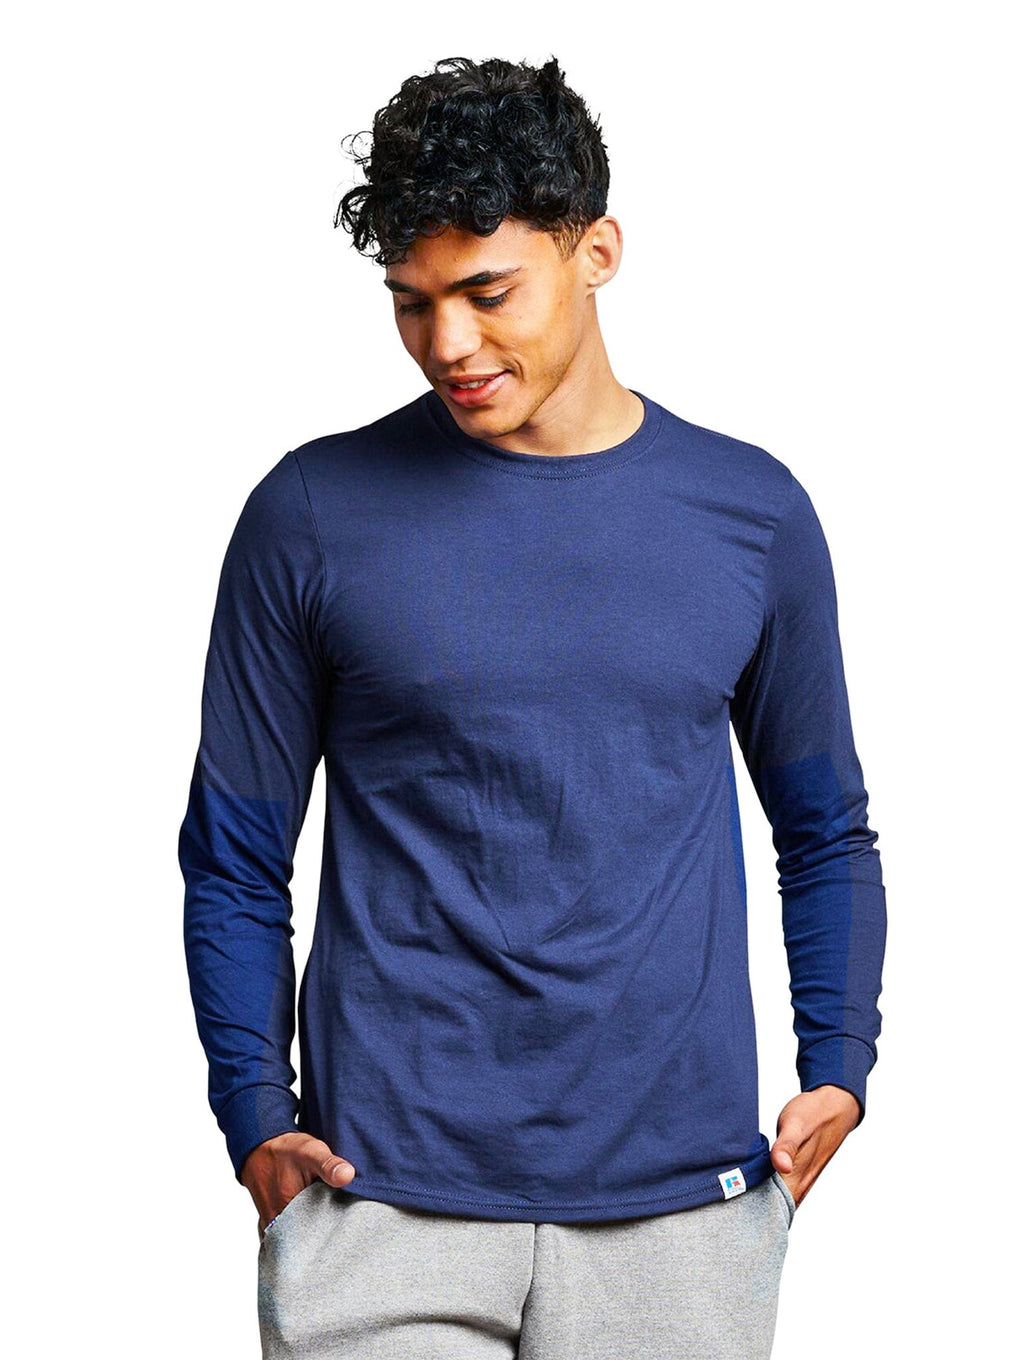 – Performance Unisex Russell Athletic Long-Sleeve Essential T-Shirt CheapesTees